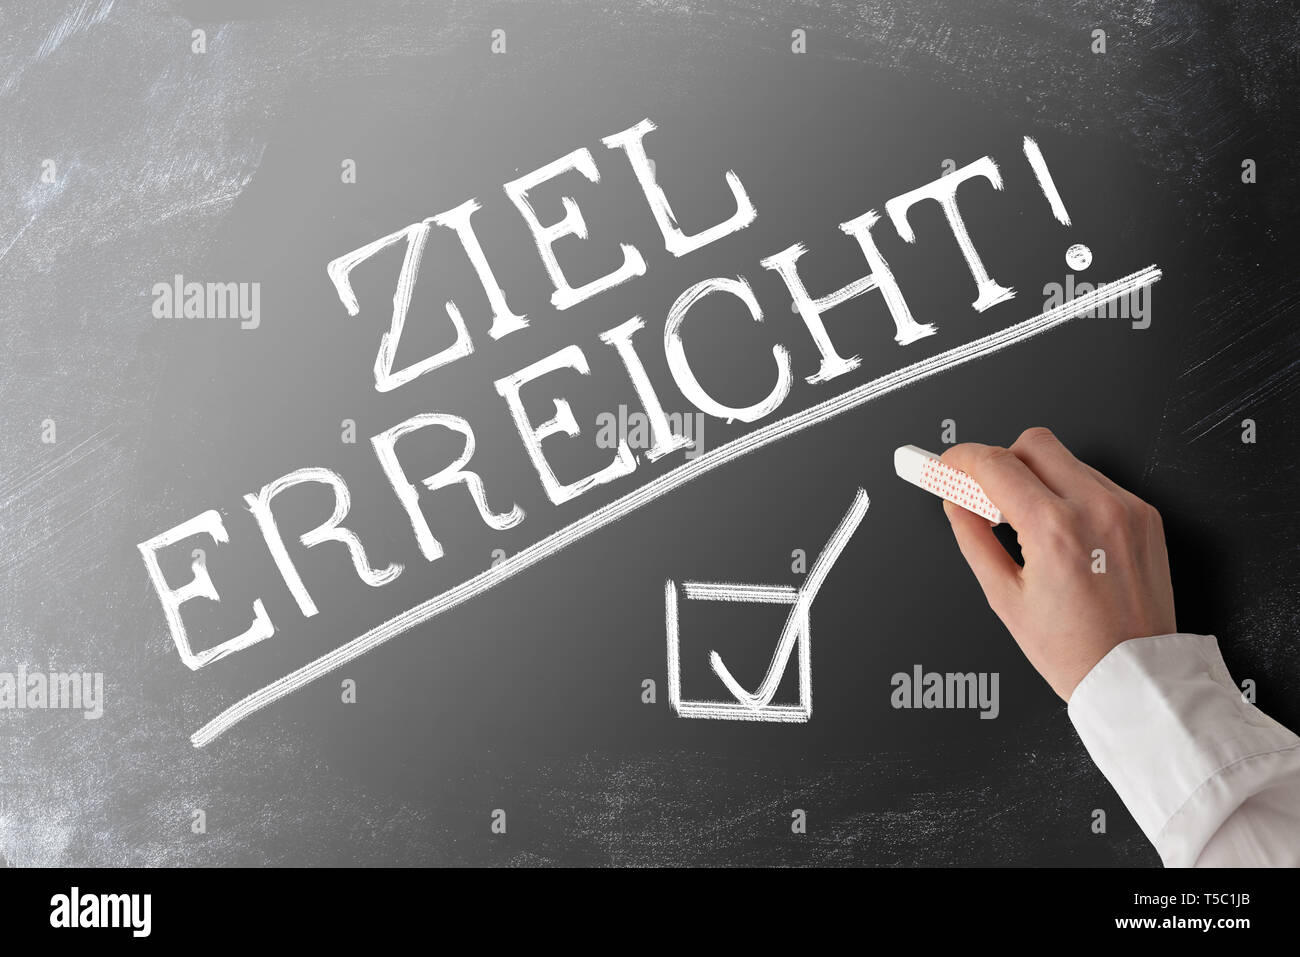 words ZIEL ERREICHT, German for goal accomplished,  with checkmark on blackboard Stock Photo